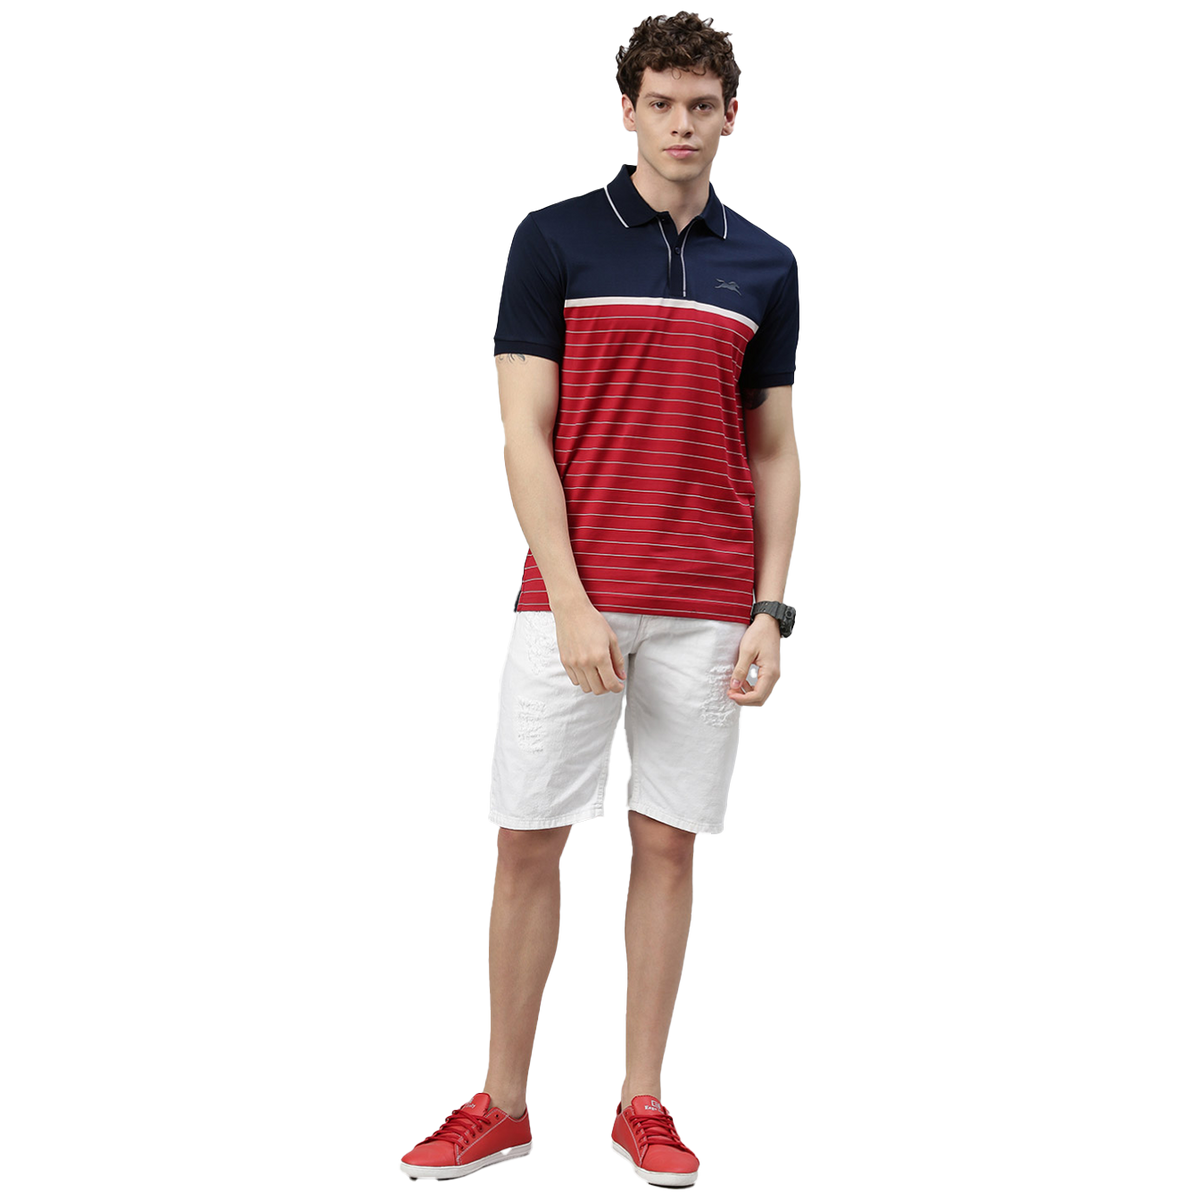 Red Bermuda Shorts with White Polo Shirt